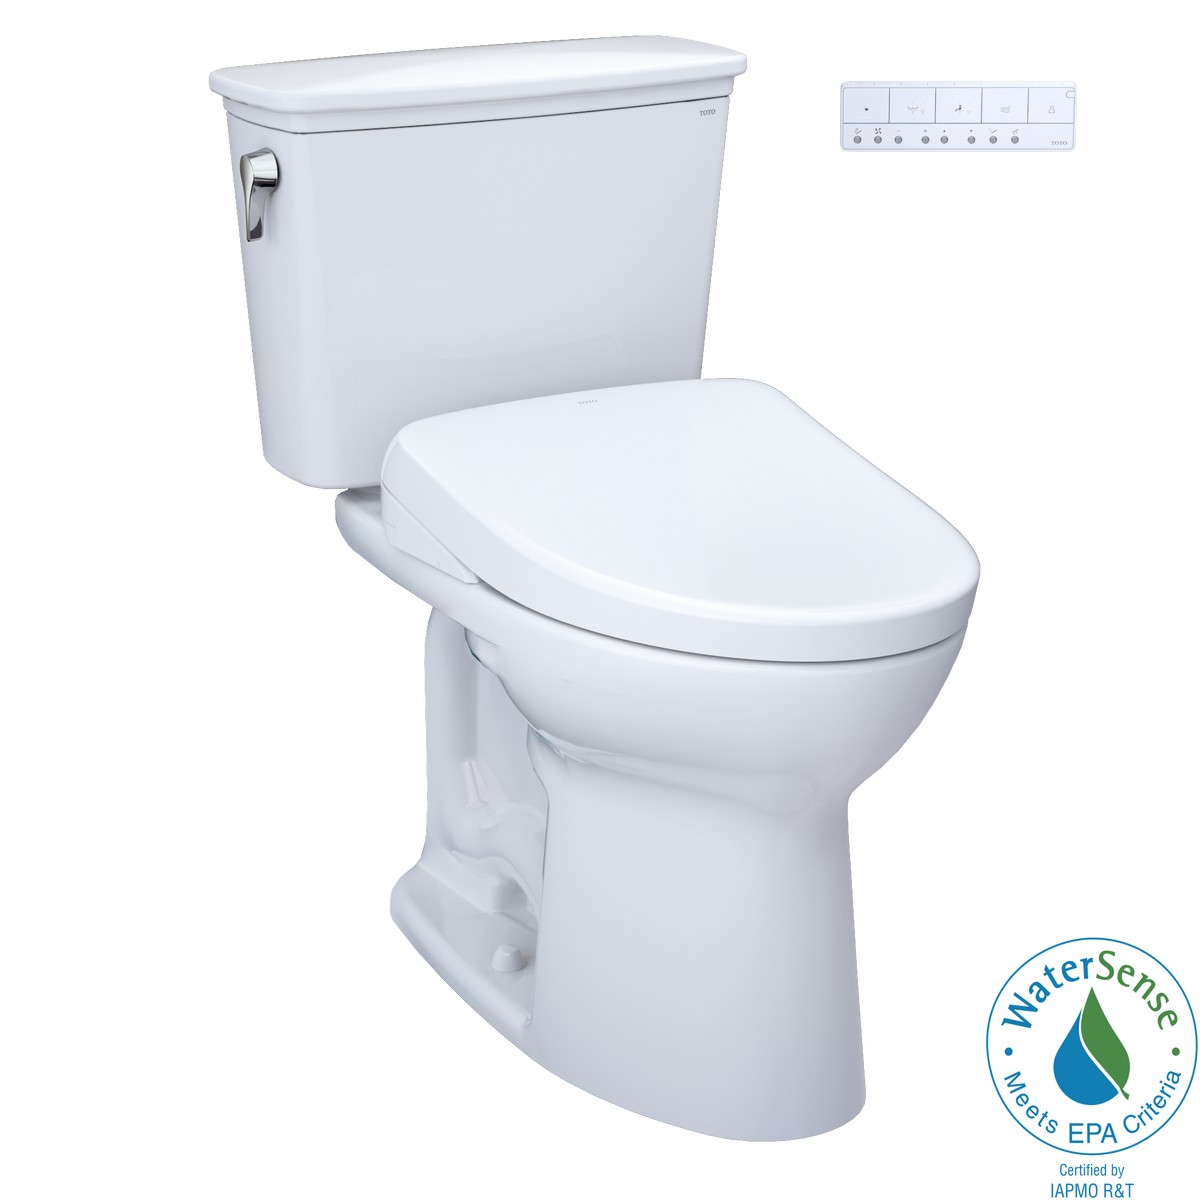 TOTO MW7864736CEF#01 DRAKE TRANSITIONAL WASHLET+ 1.28 GPF TWO PIECE ELONGATED UNIVERSAL HEIGHT TORNADO FLUSH TOILET WITH WASHLET S7A BIDET SEAT IN COTTON WHITE